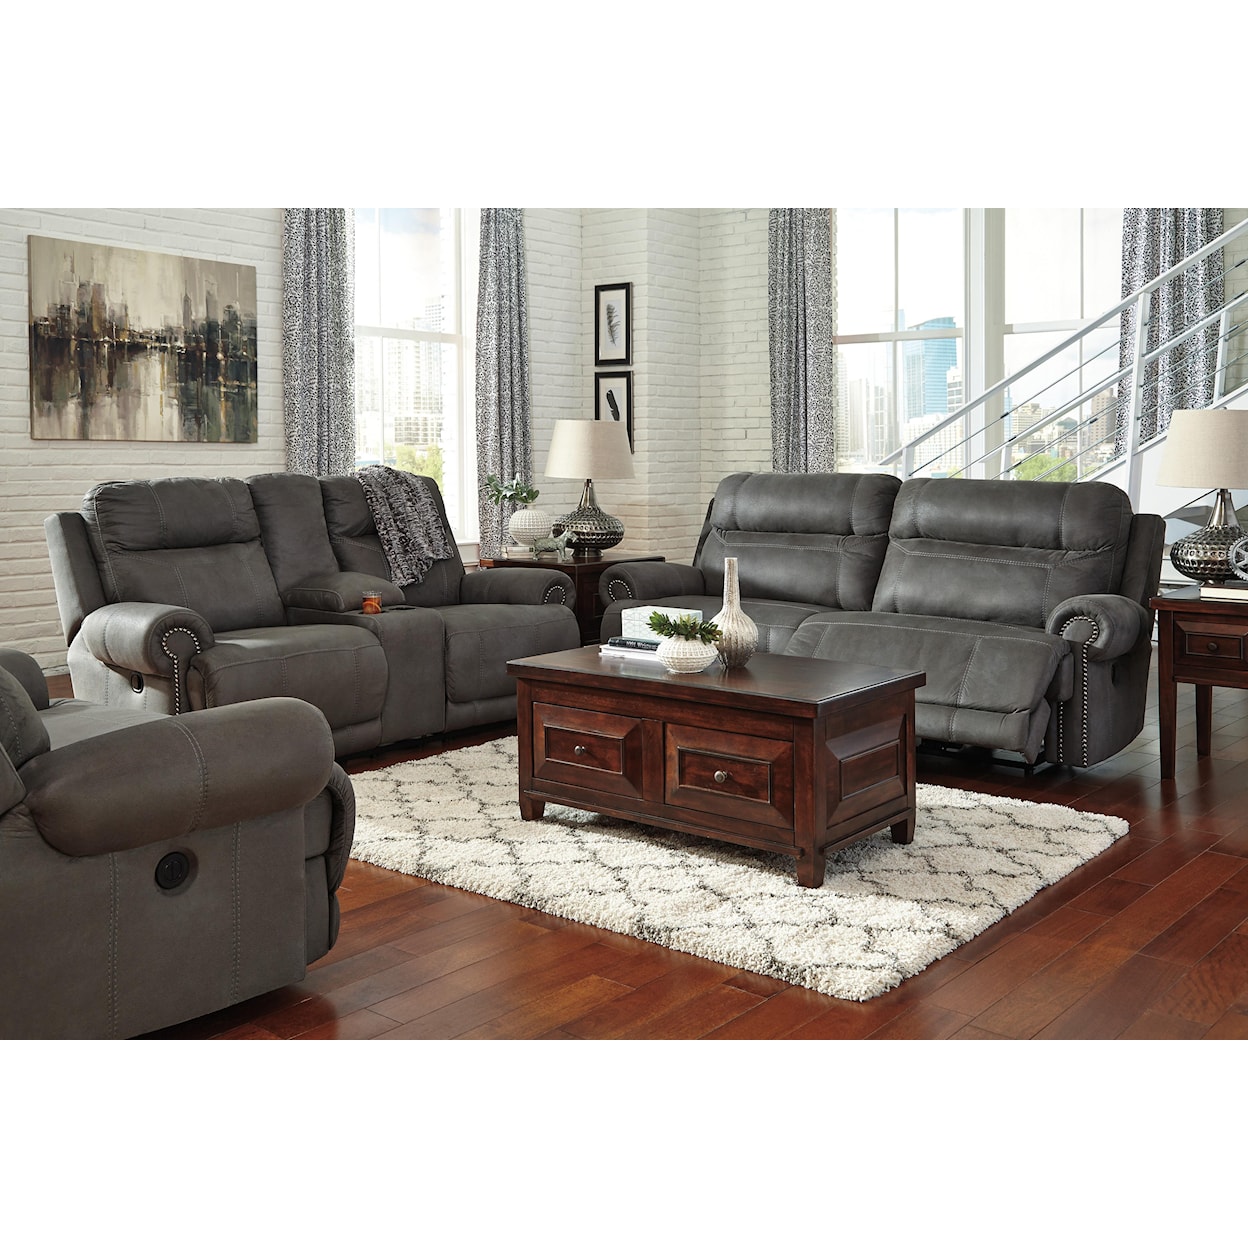 Signature Design by Ashley Austere 2 Seat Reclining Sofa